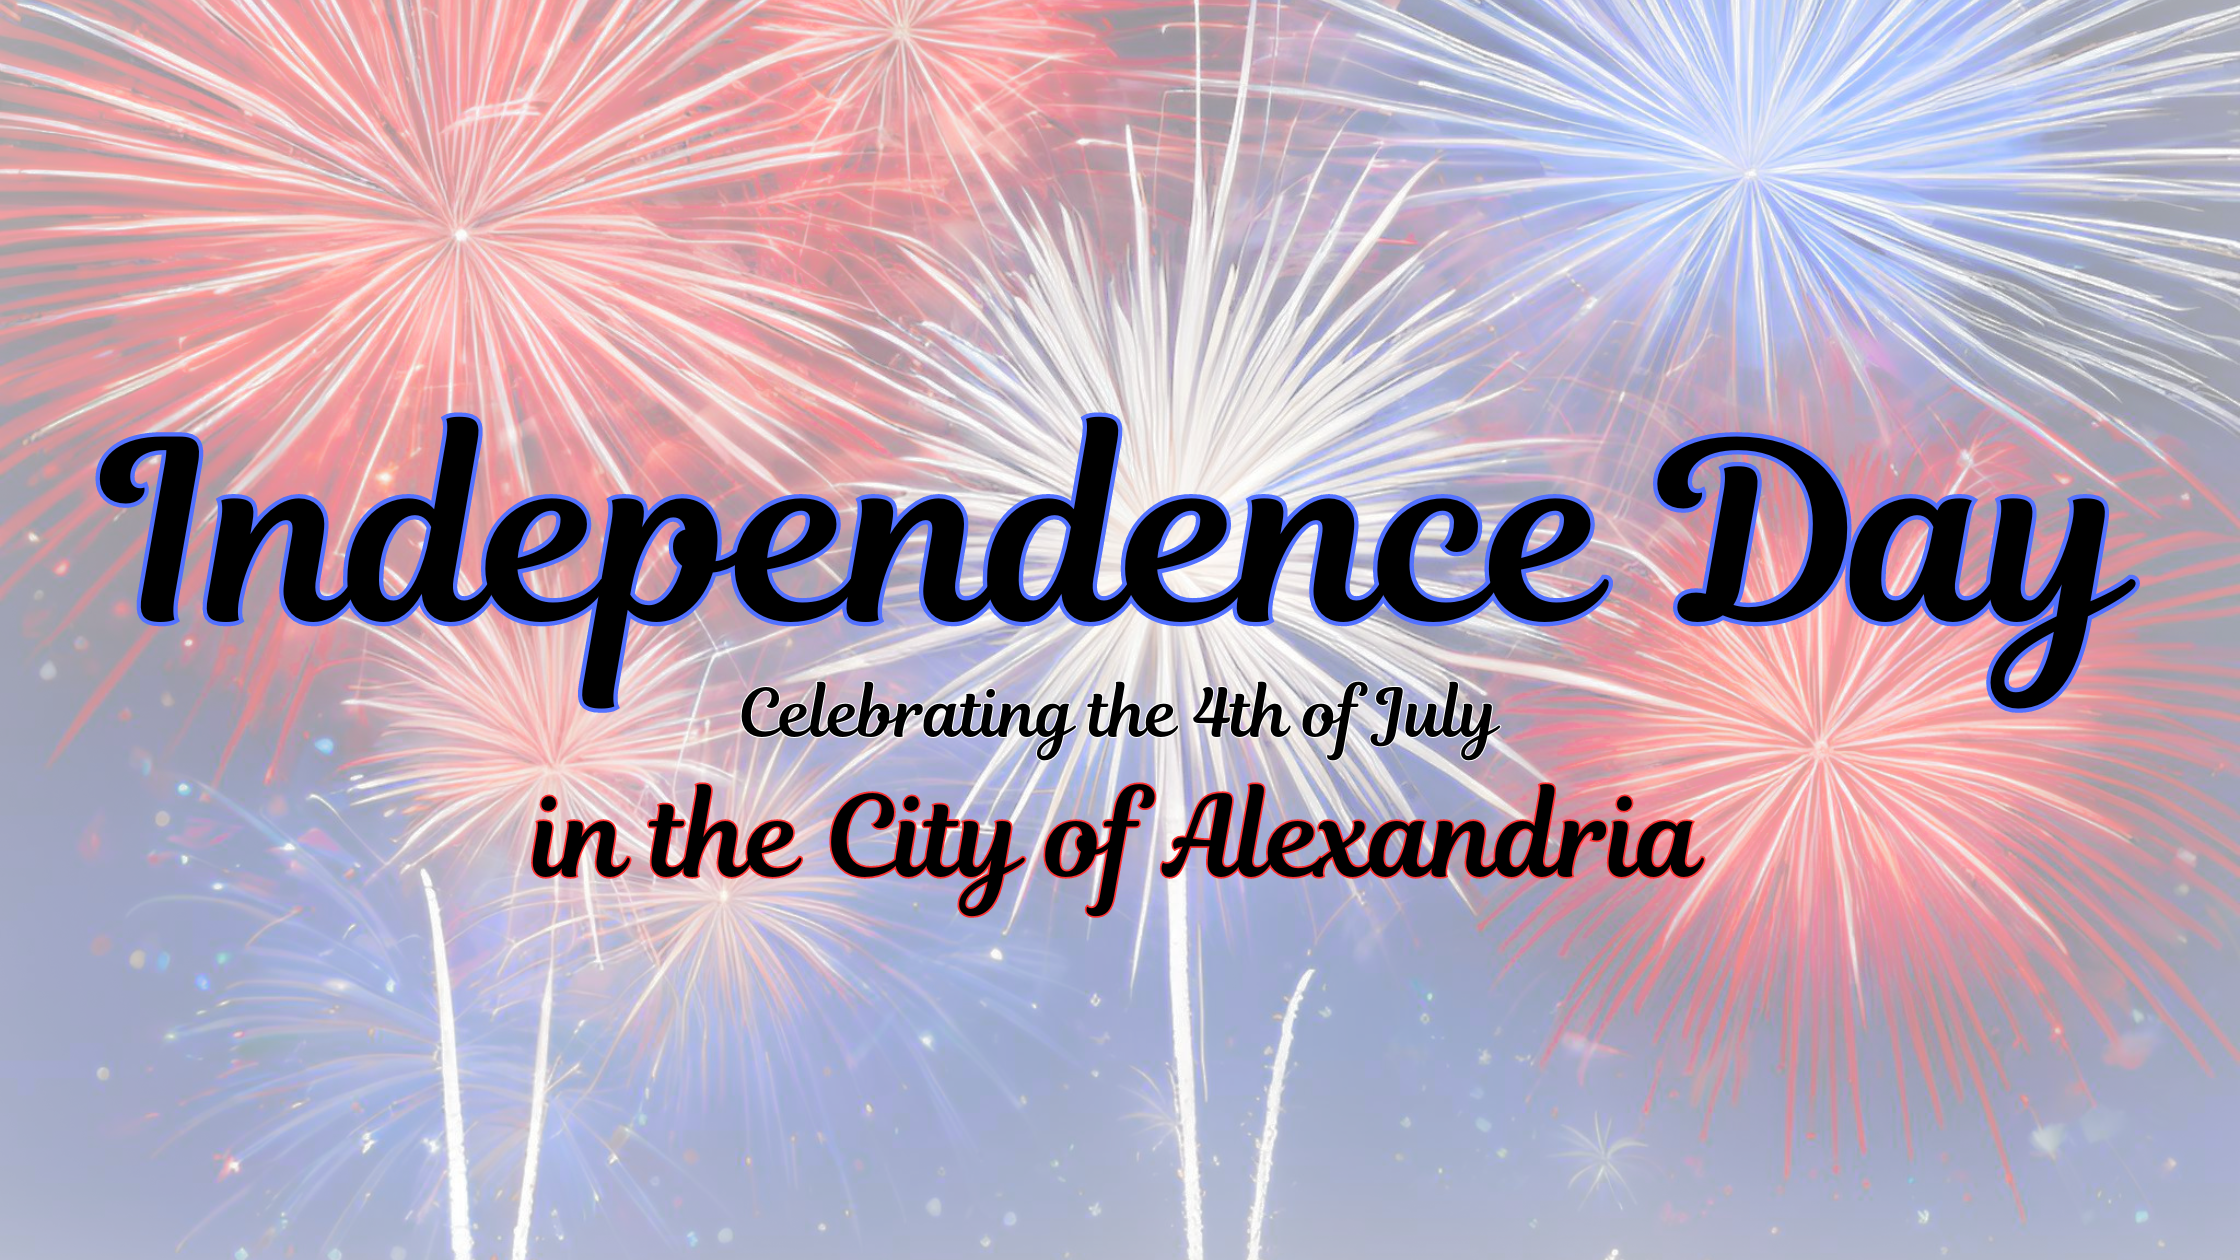 Celebrating Independence Day in the City of Alexandria